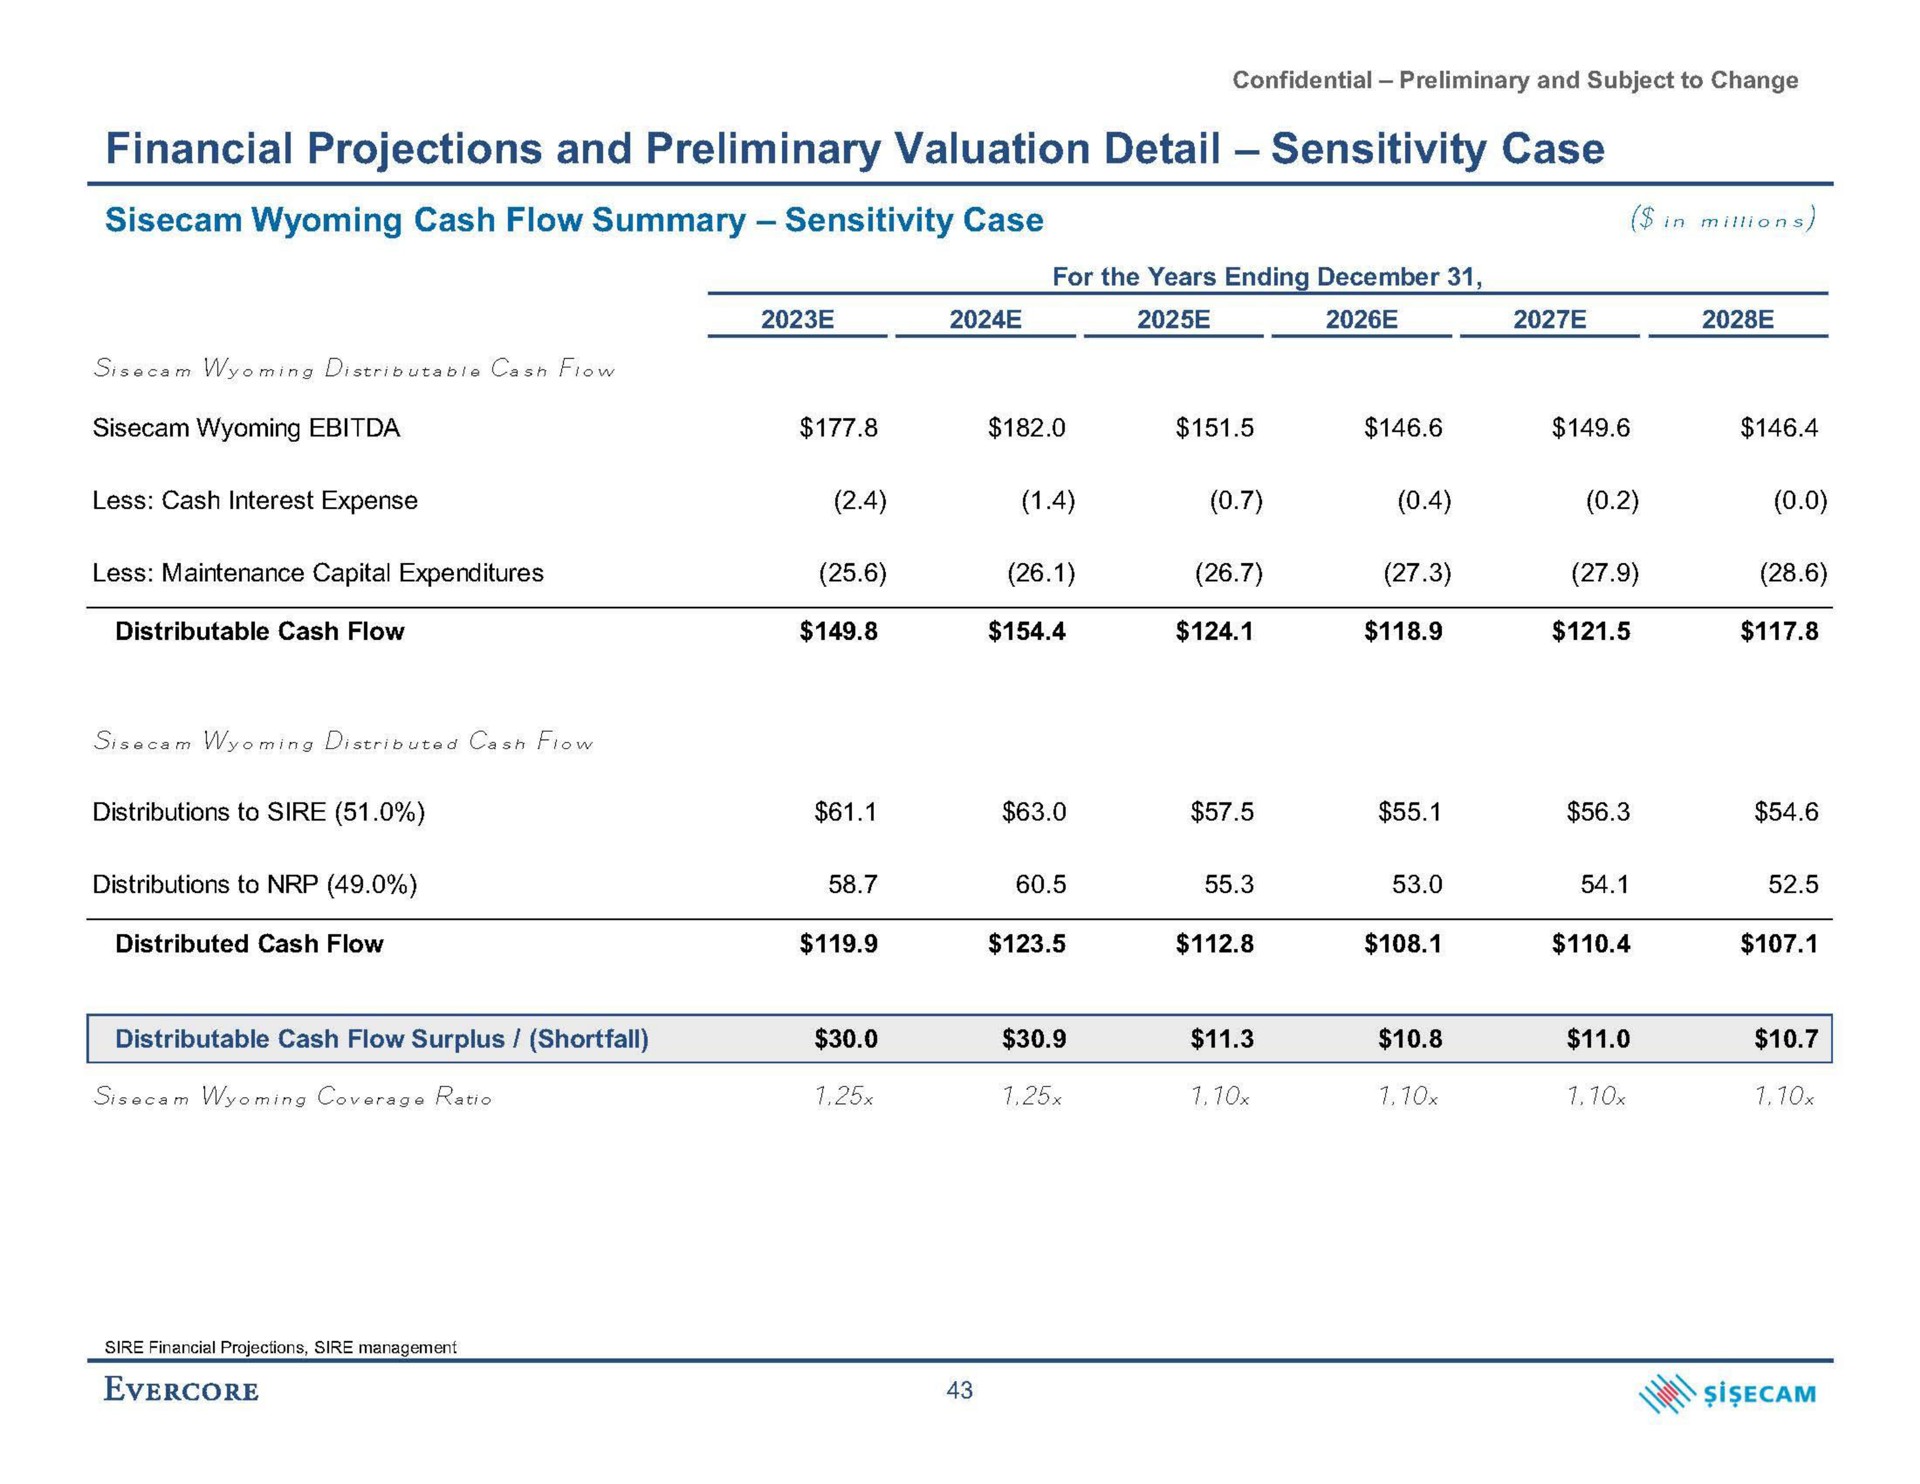 financial projections and preliminary valuation detail sensitivity case cash flow summary sensitivity case in | Evercore